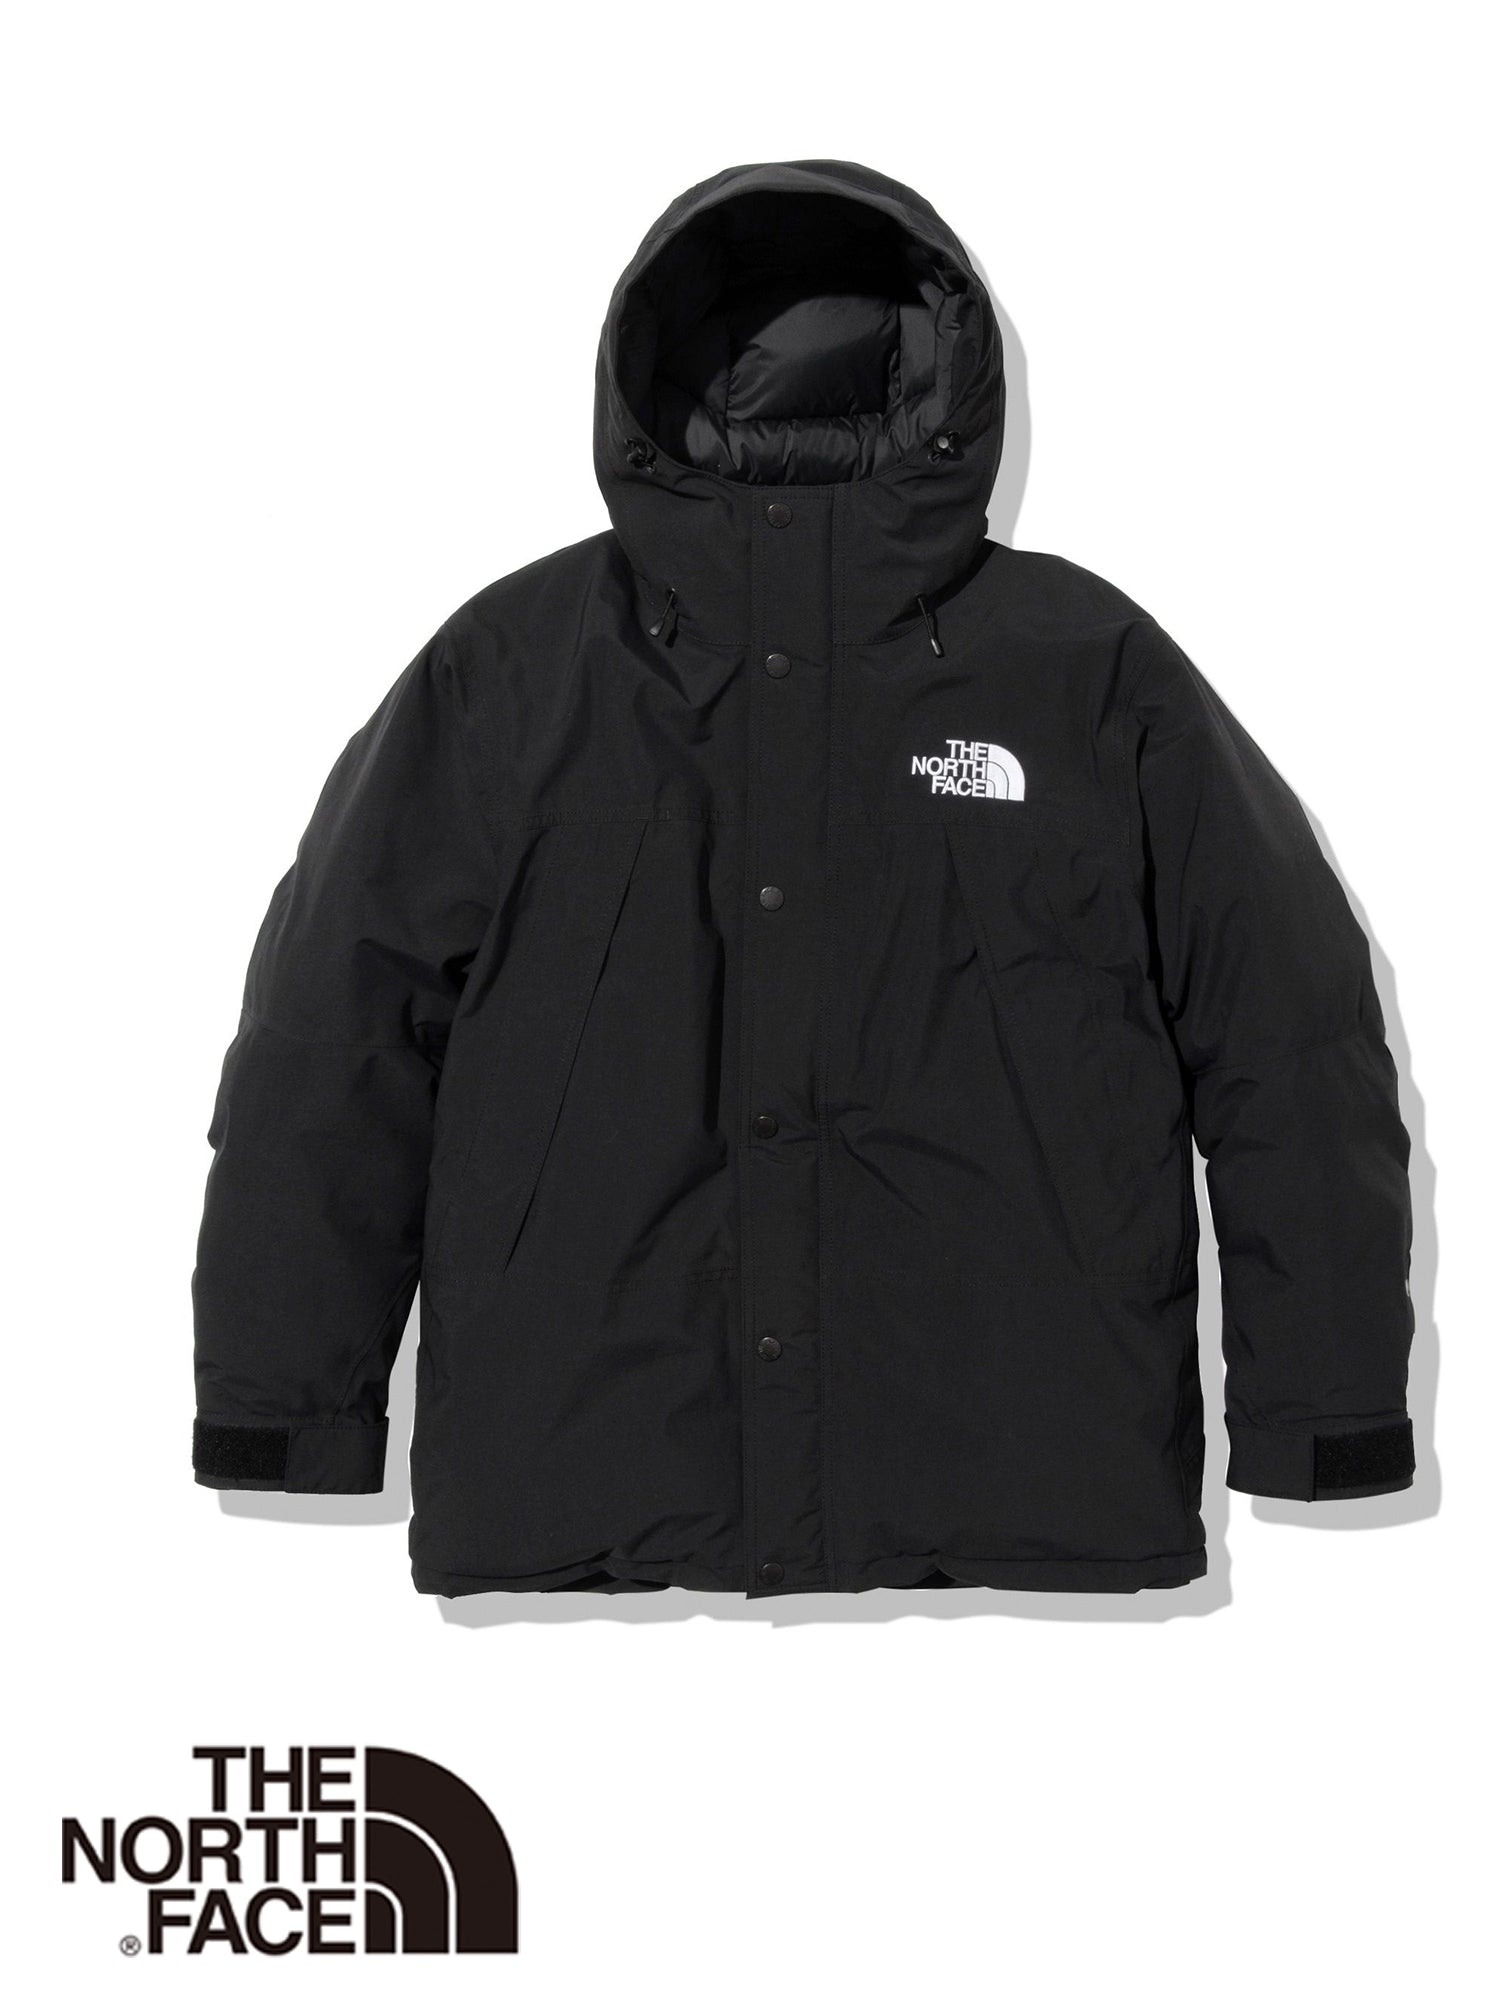 THE NORTH FACE] Mountain Down Jacket / The North Face Unisex ...